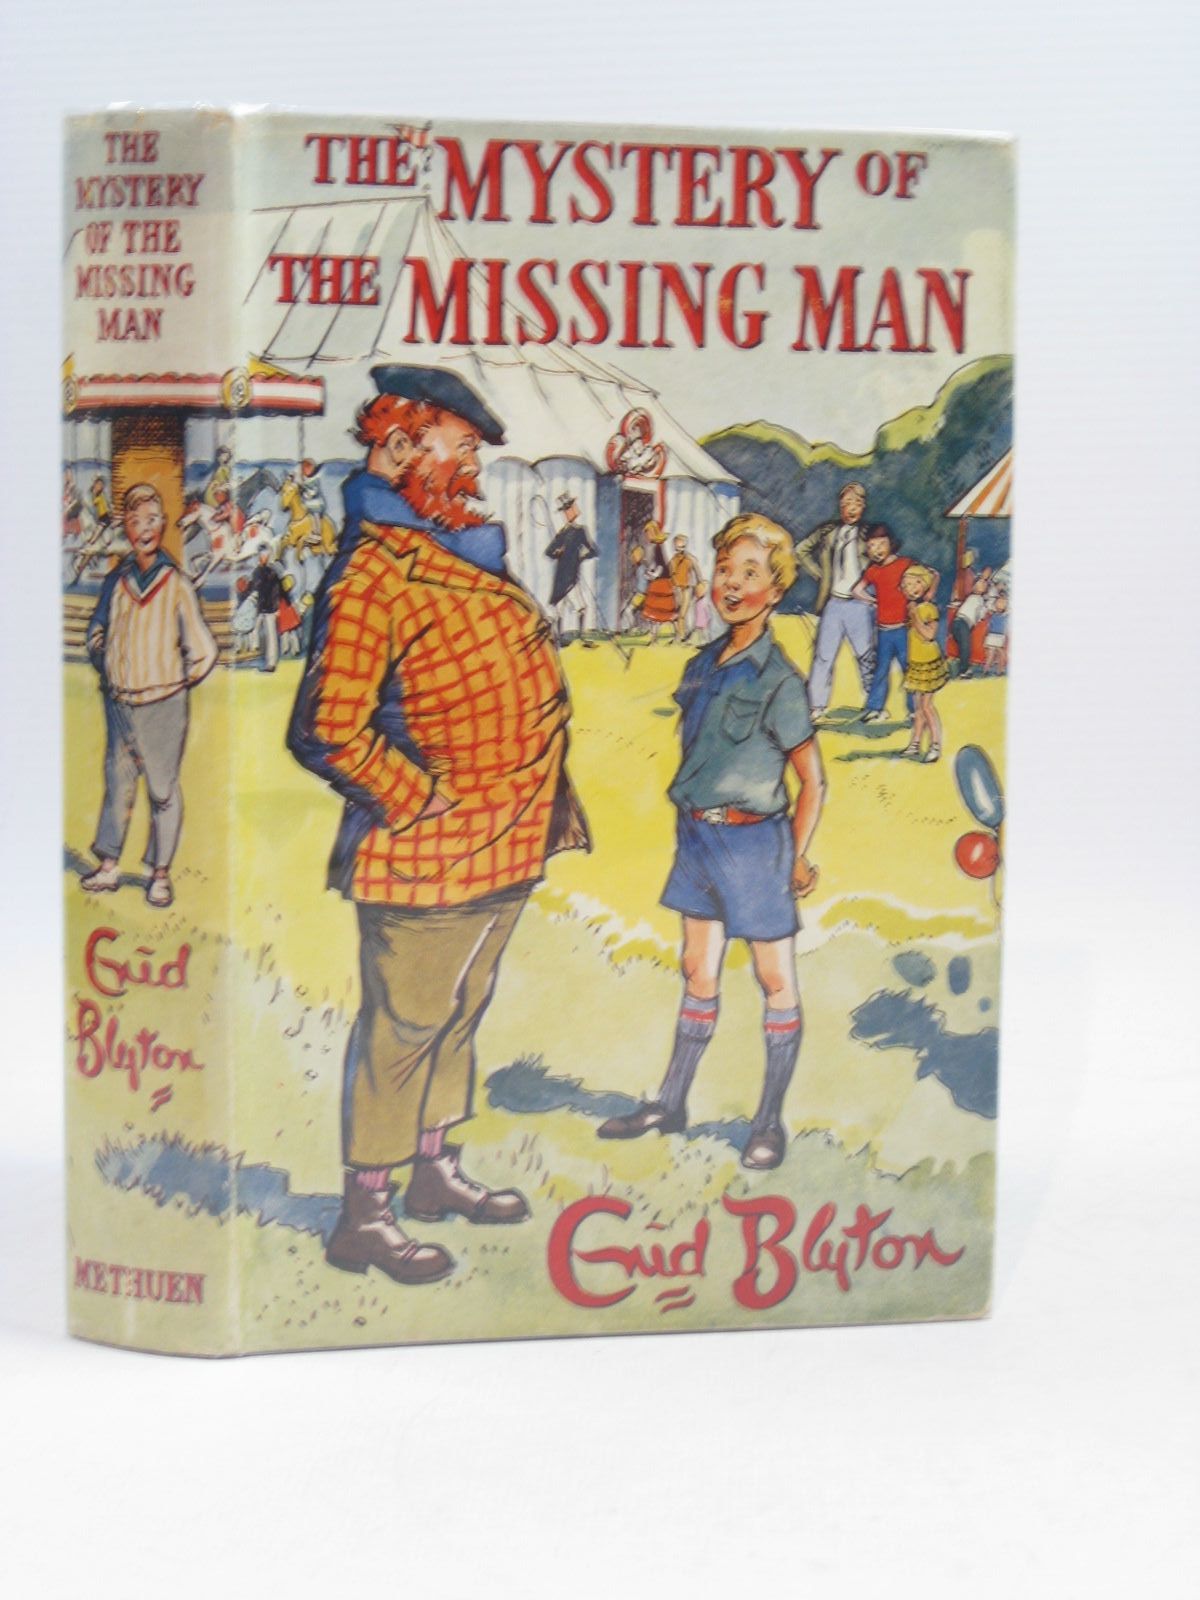 Cover of THE MYSTERY OF THE MISSING MAN by Enid Blyton